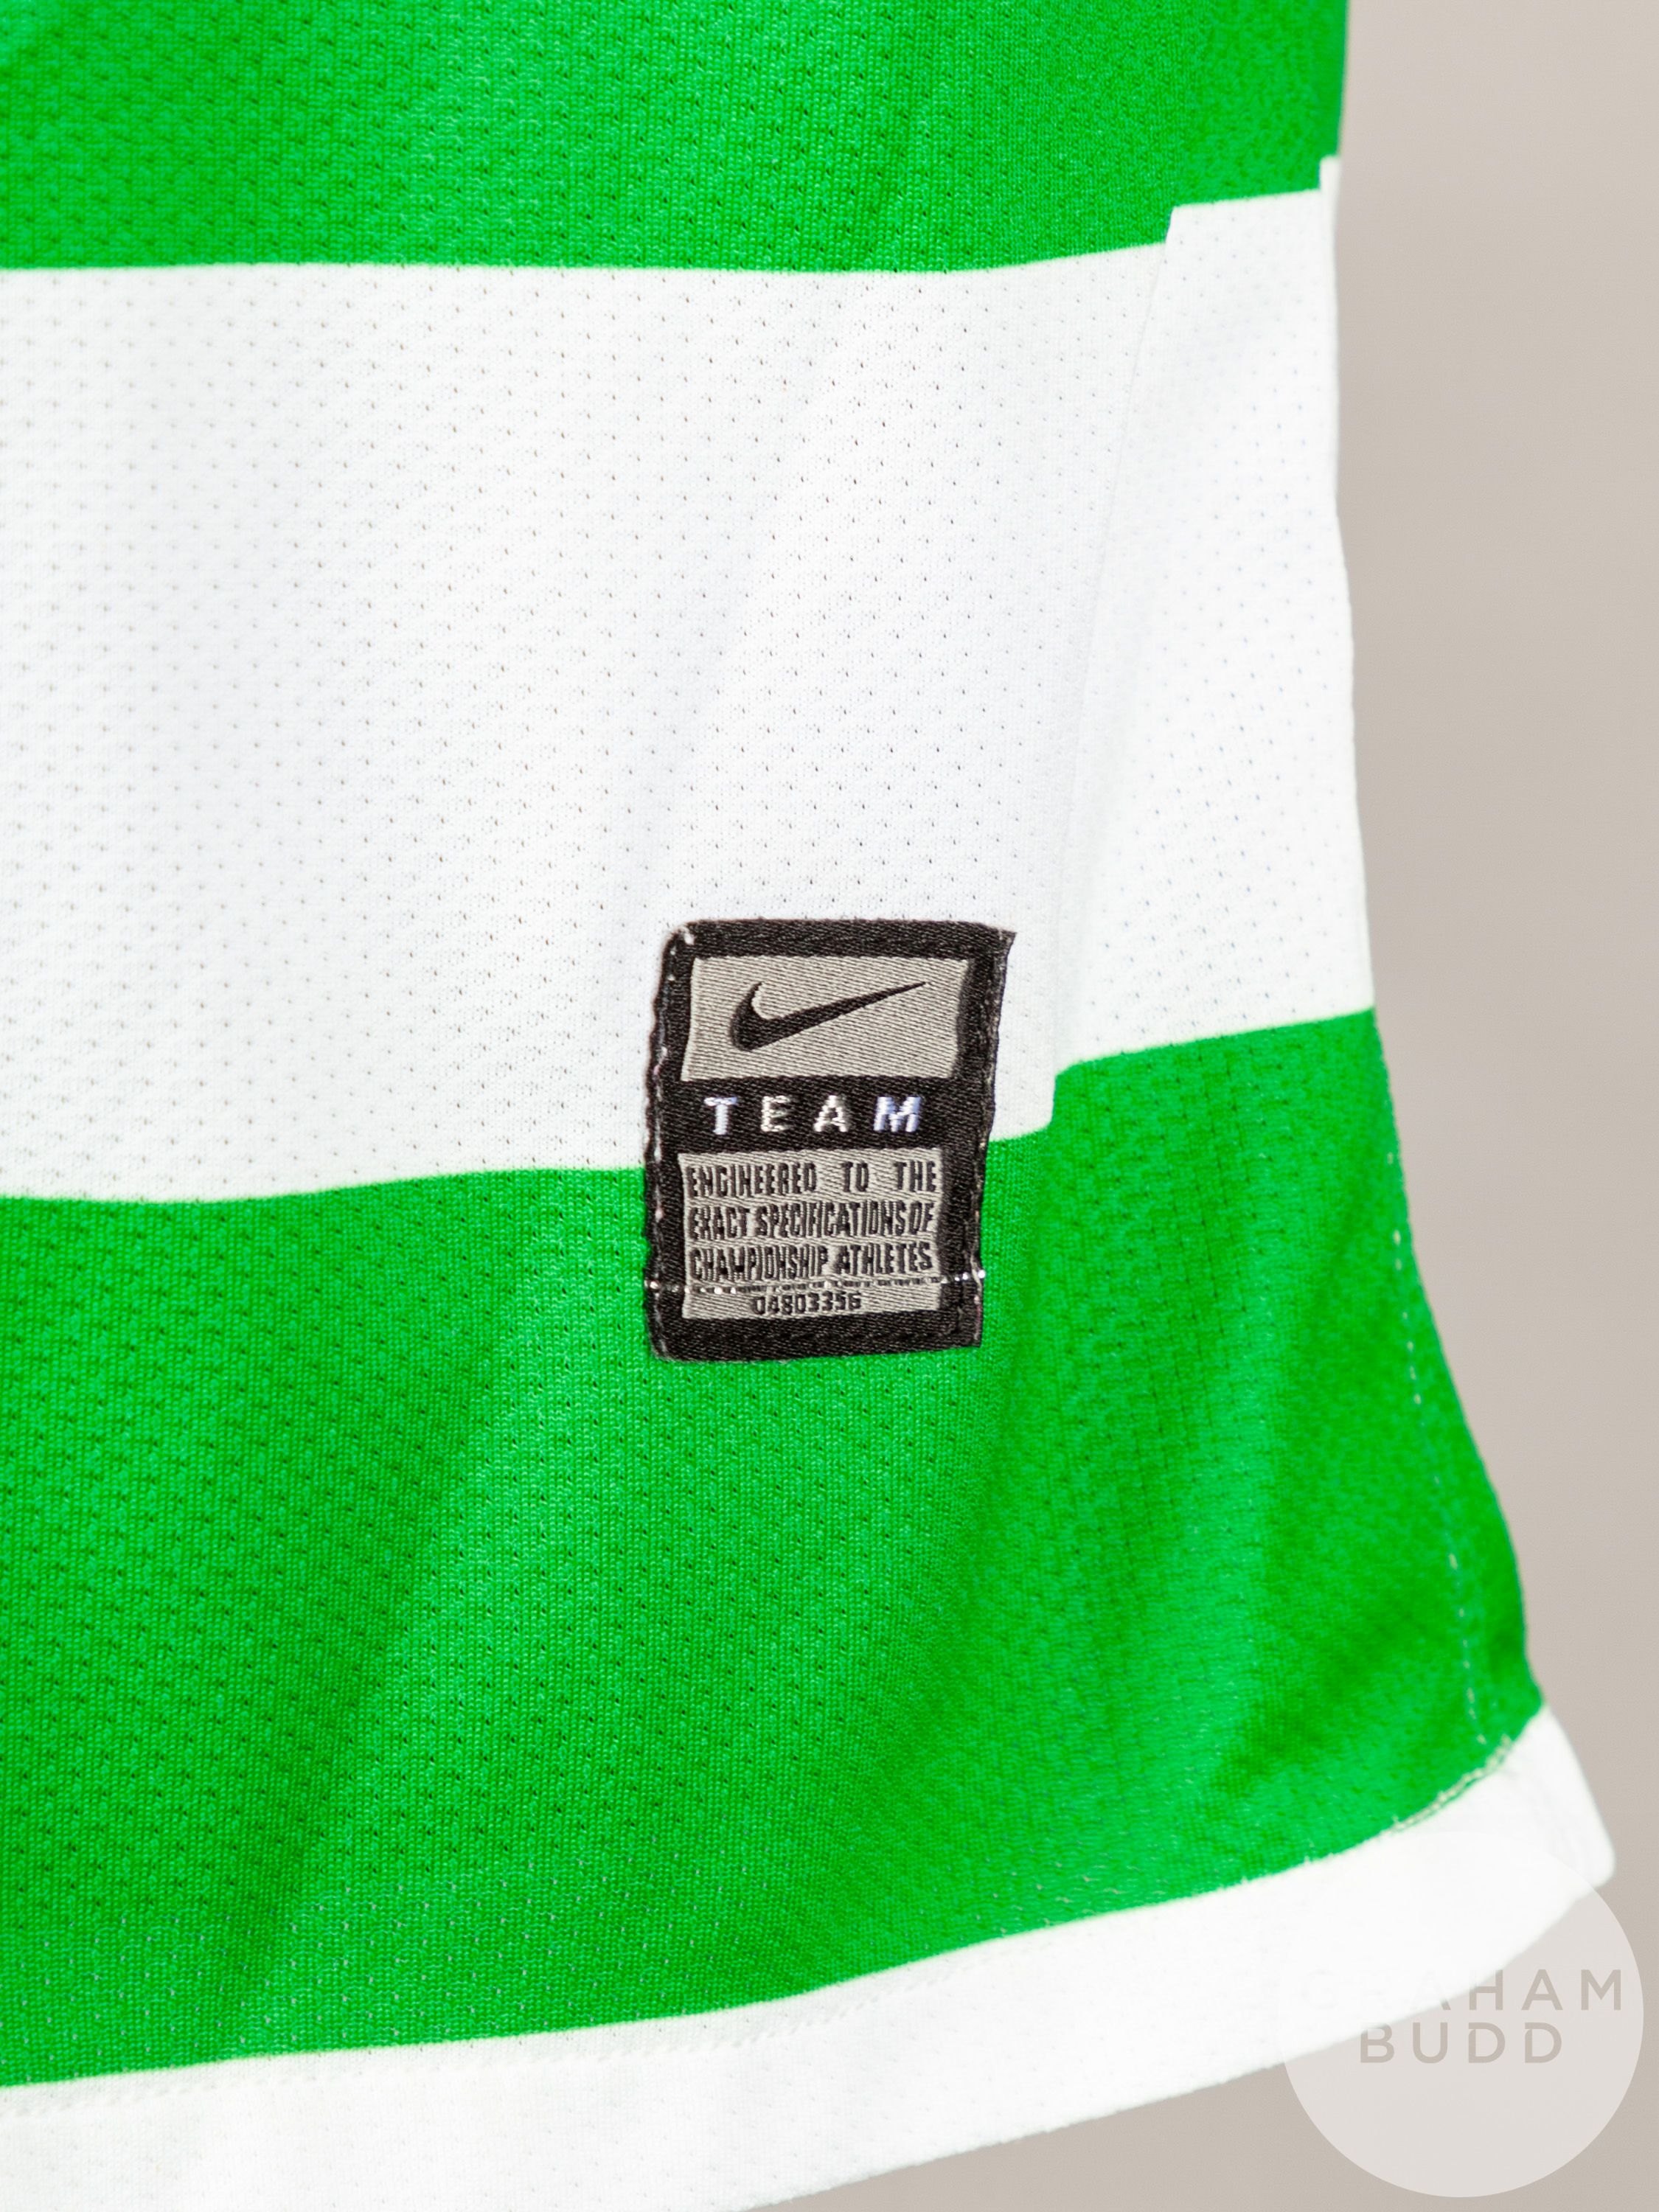 Danny Fox green and white No.11 Celtic Champions League short-sleeved shirt - Image 4 of 6